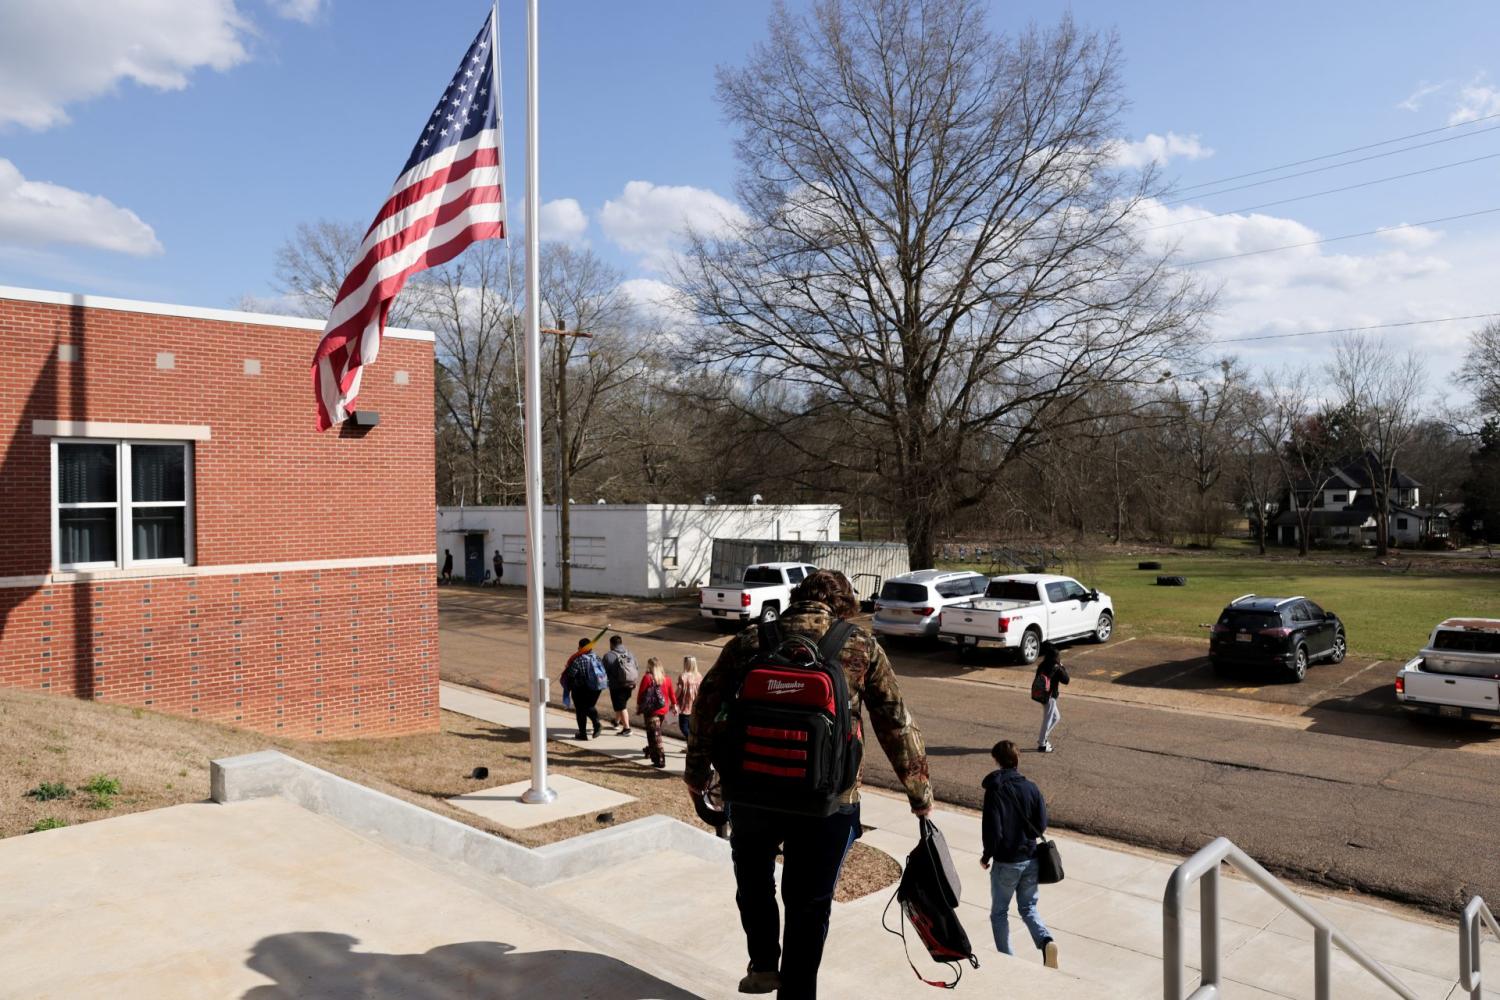 Students depart for spring break at the end of an in-person school day at Choctaw County High School in Ackerman, Mississippi, U.S. March 11, 2021. In rural Choctaw County, Mississippi, a recent lull in Covid cases and ongoing vaccination campaigns are giving many members of the community a sense of optimism about the yearlong coronavirus disease (COVID-19) pandemic as Mississippi and surrounding states have announced that they are rescinding  mask mandates and other coronavirus restrictions. Picture taken March 11, 2021. REUTERS/Jonathan Ernst